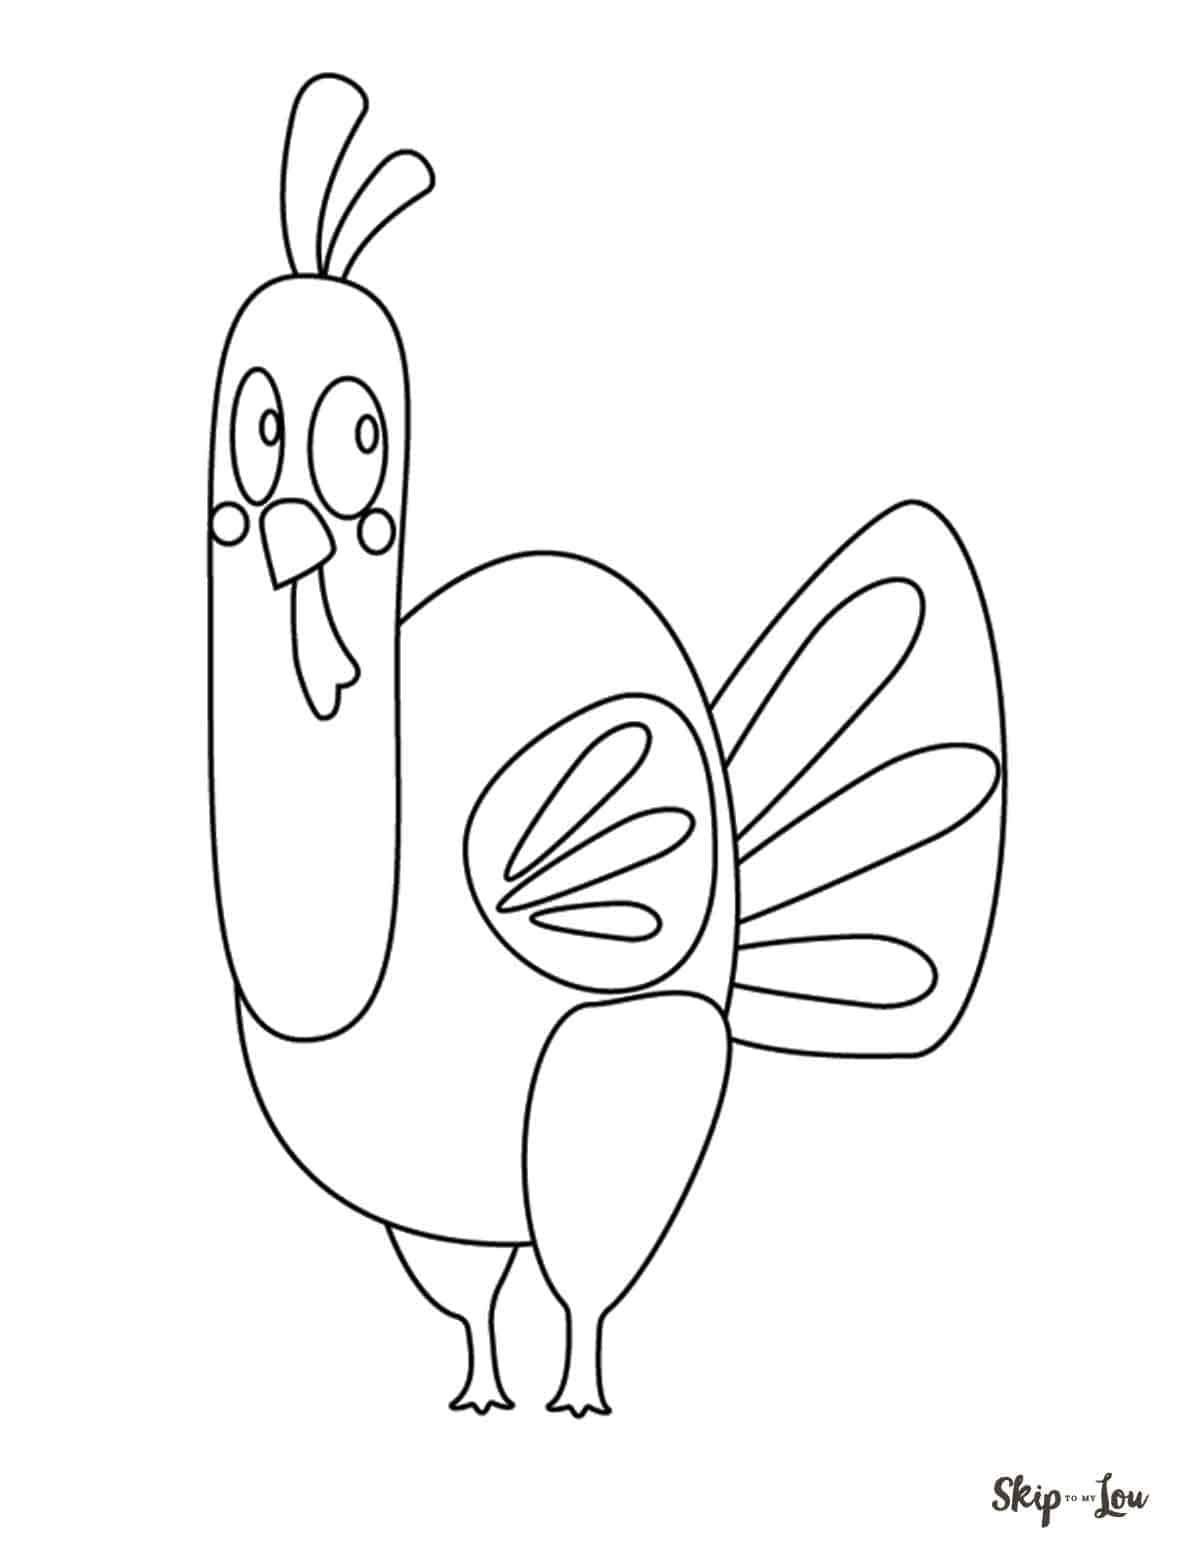 The cutest free turkey coloring pages skip to my lou